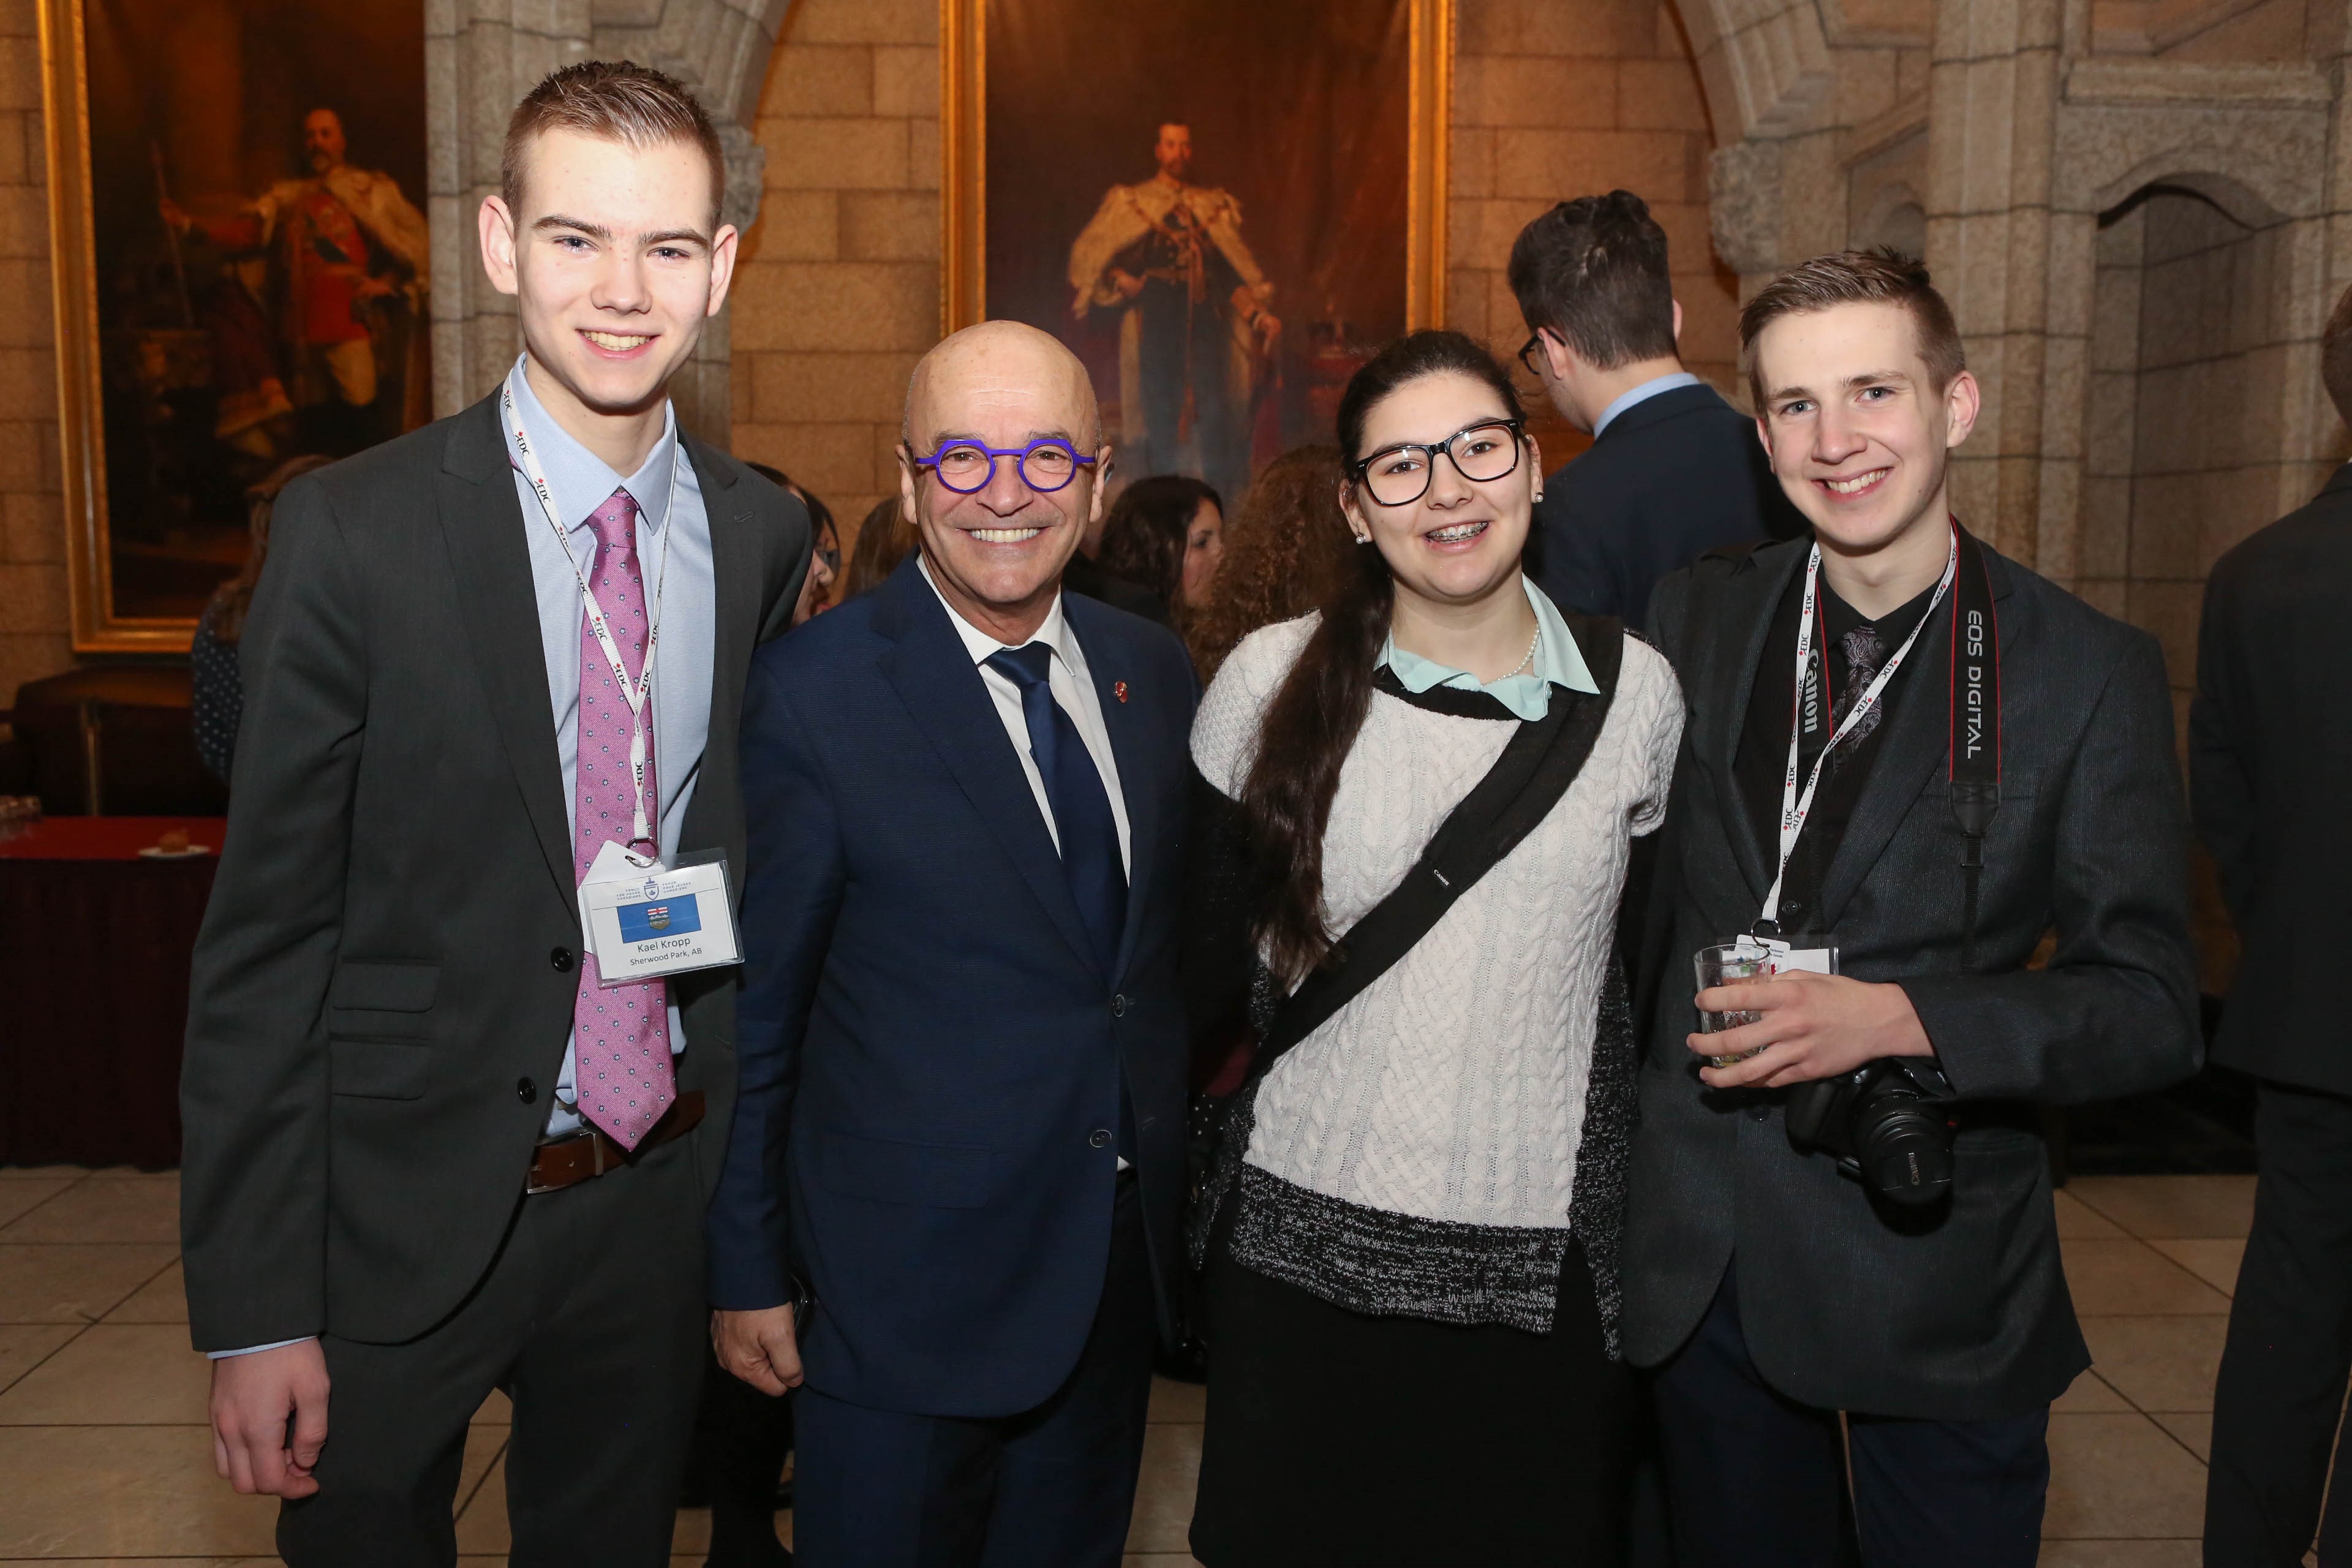 "It's a real privilege to meet them," says Senator René Cormier. "The curiosity and appetite for learning about public affairs shown by these young leaders was a real source of inspiration and shows great promise for the future of democracy in this country."